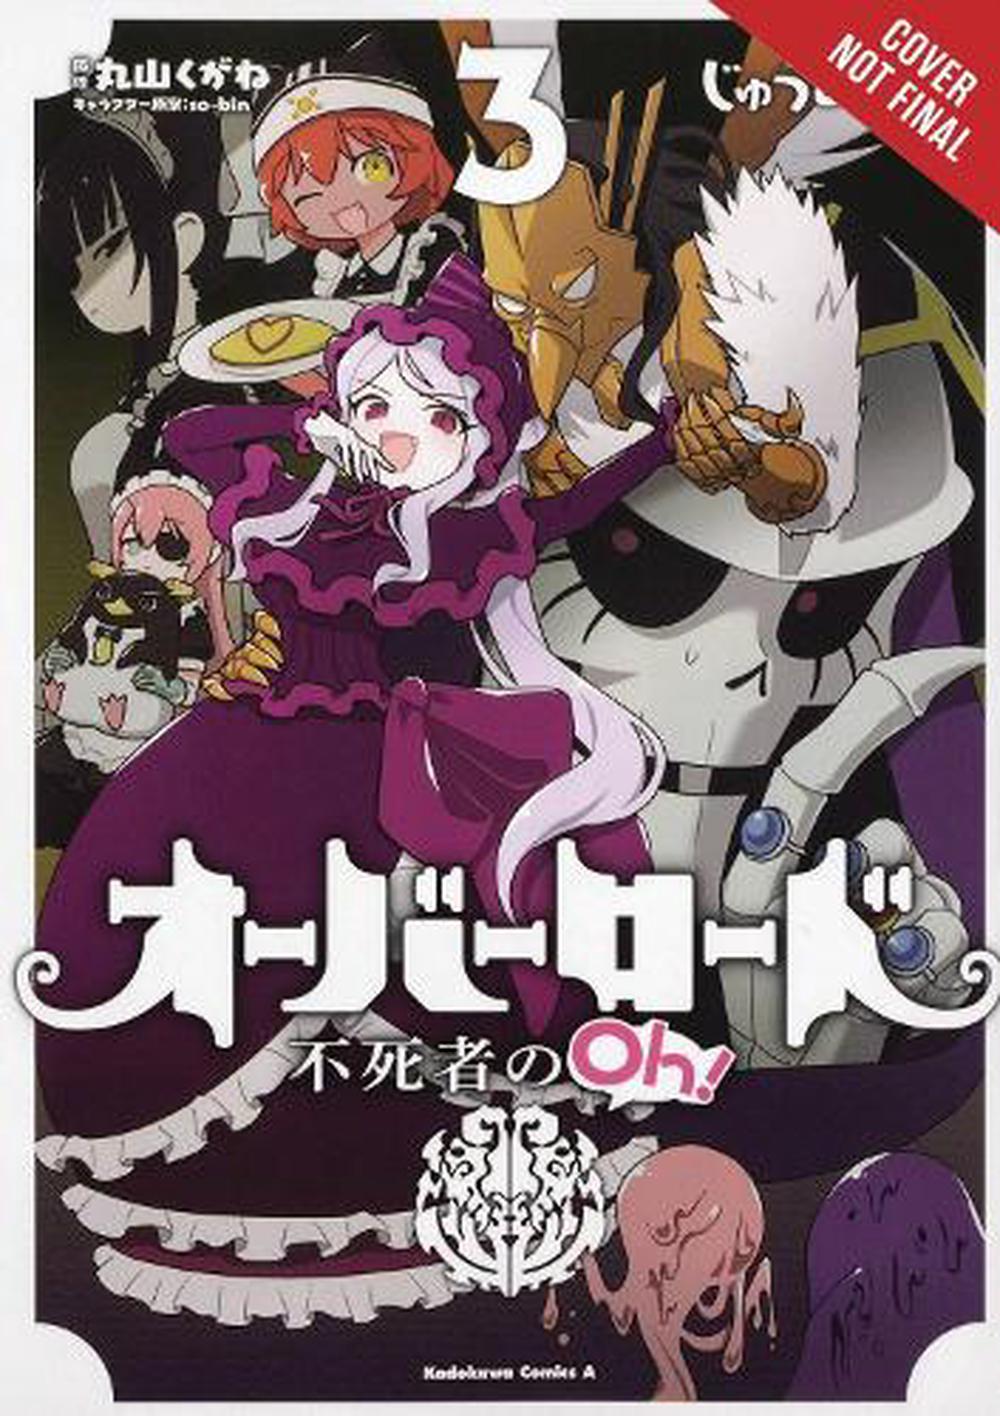 Overlord The Undead King Oh Vol 3 By Kugane Maruyama Paperback Buy Online At The Nile